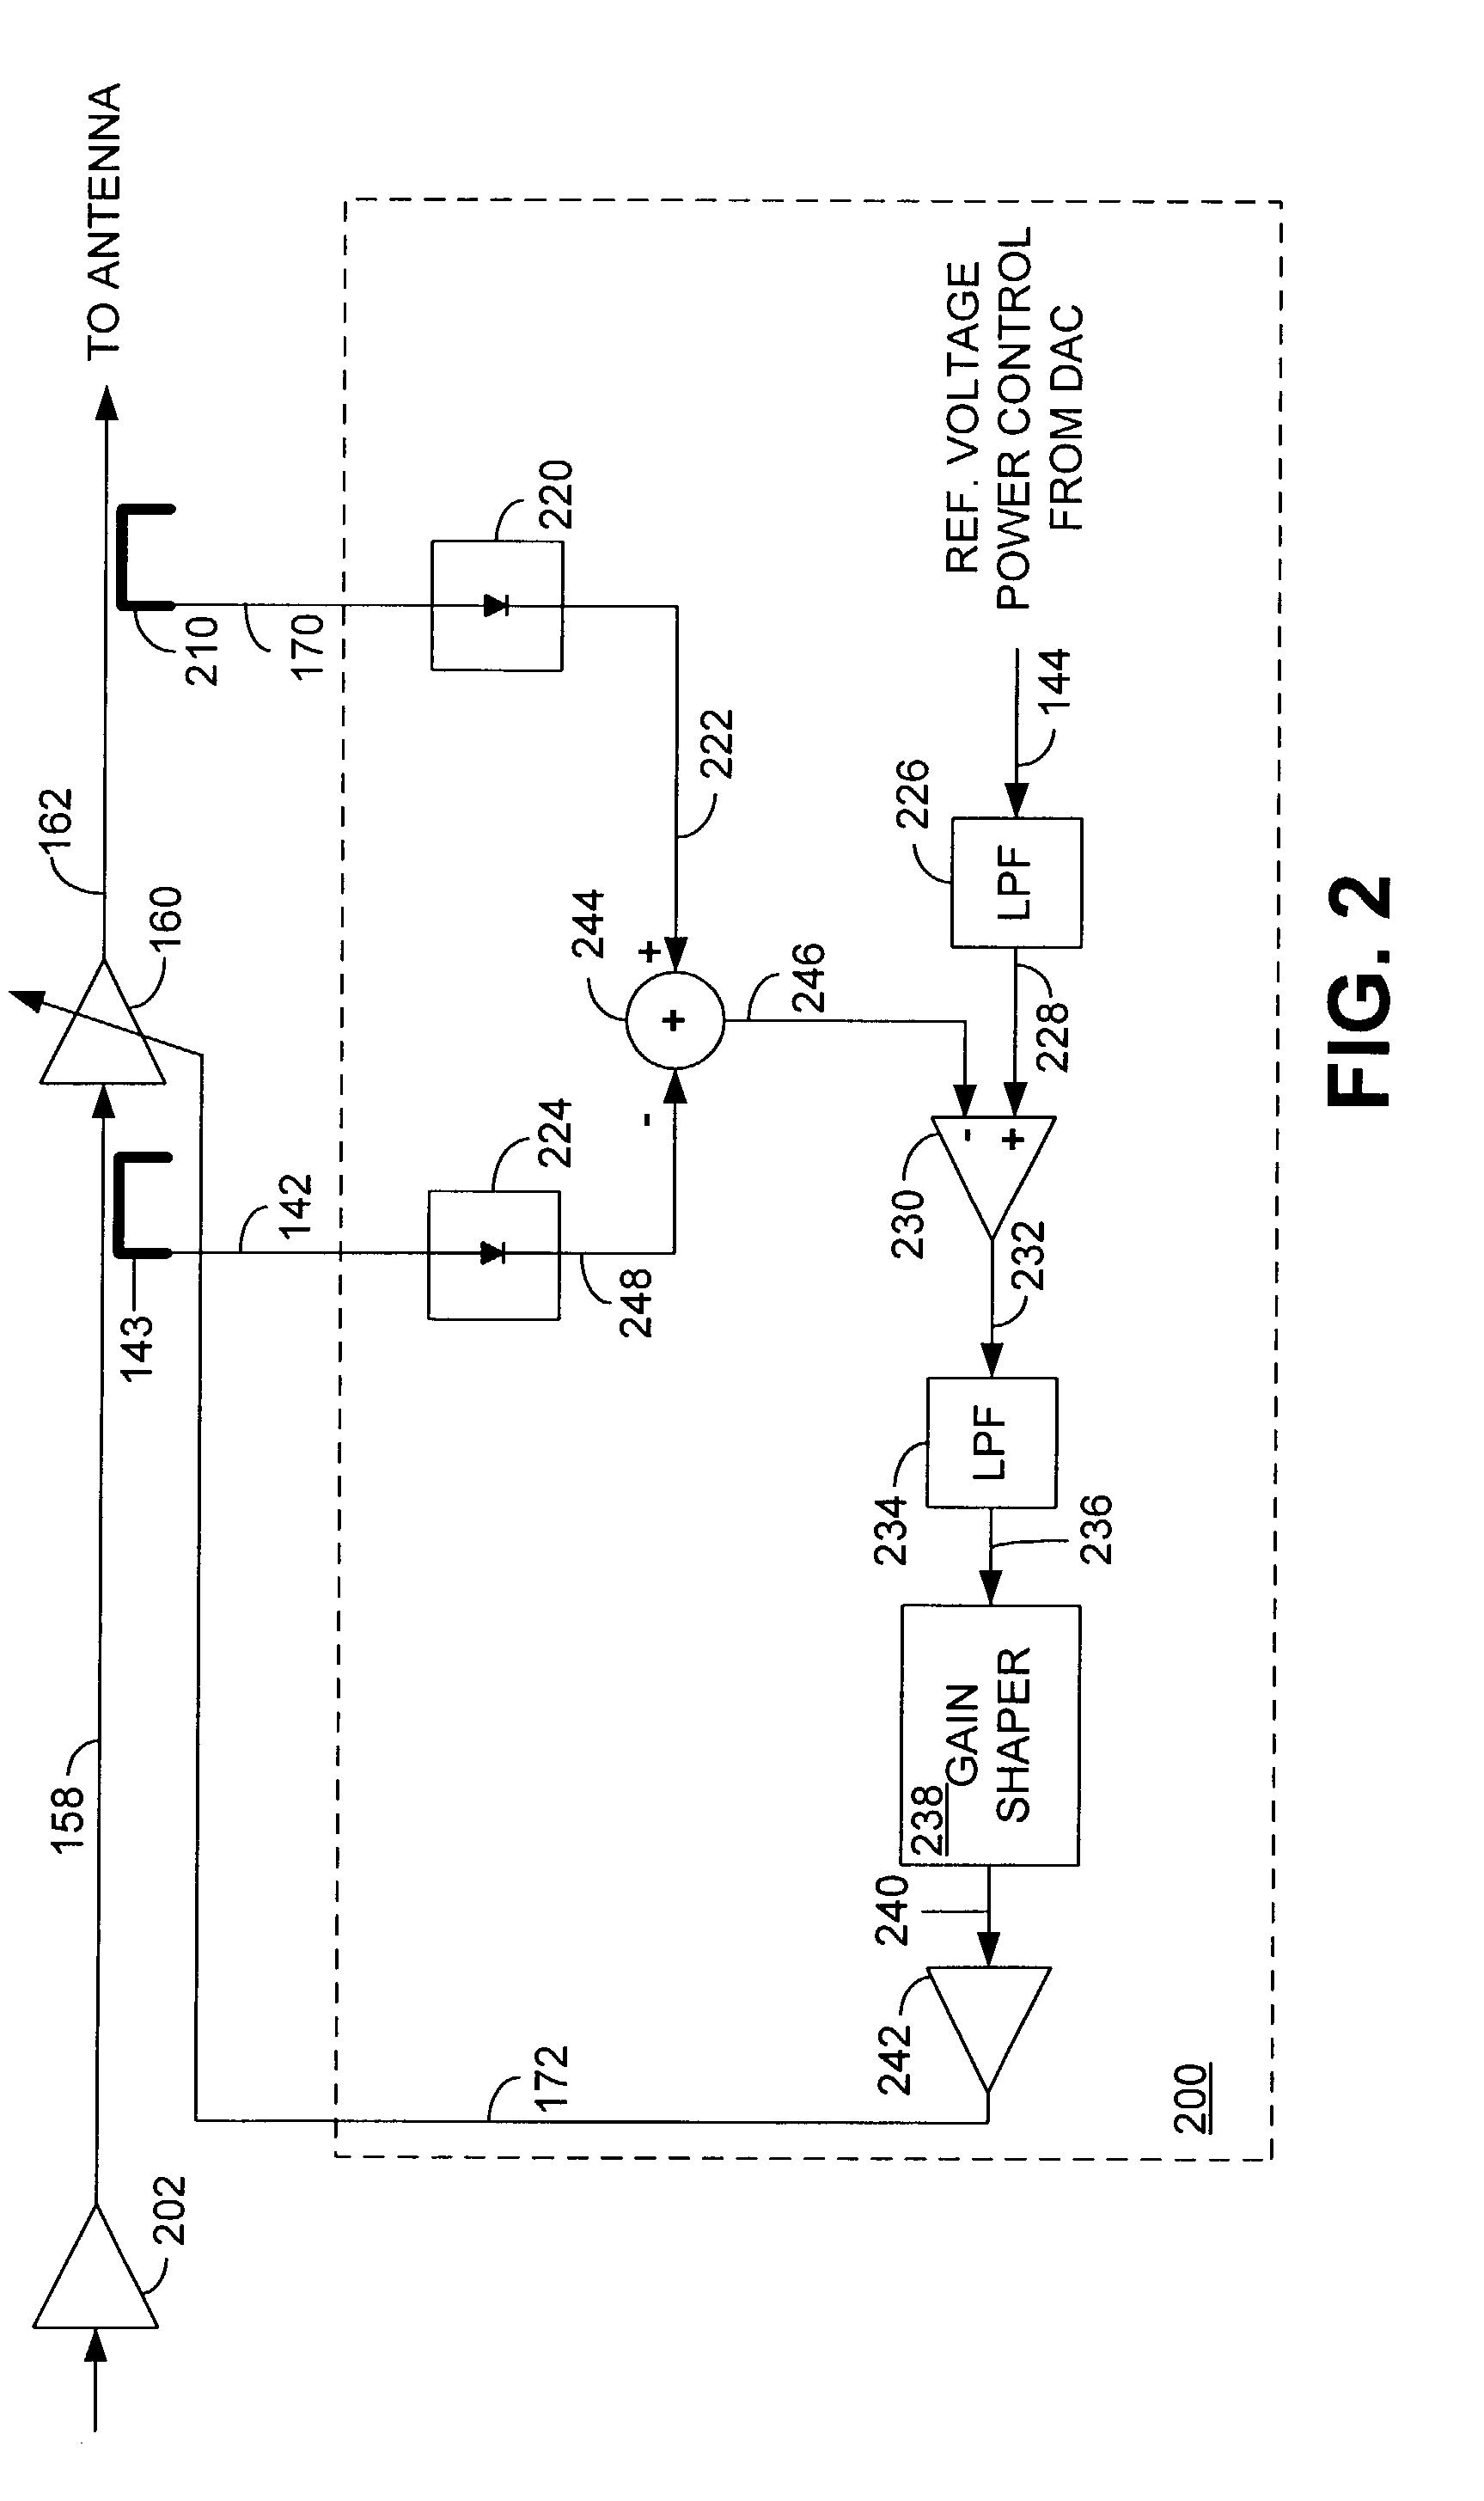 Fast closed-loop power control for non-constant envelope modulation